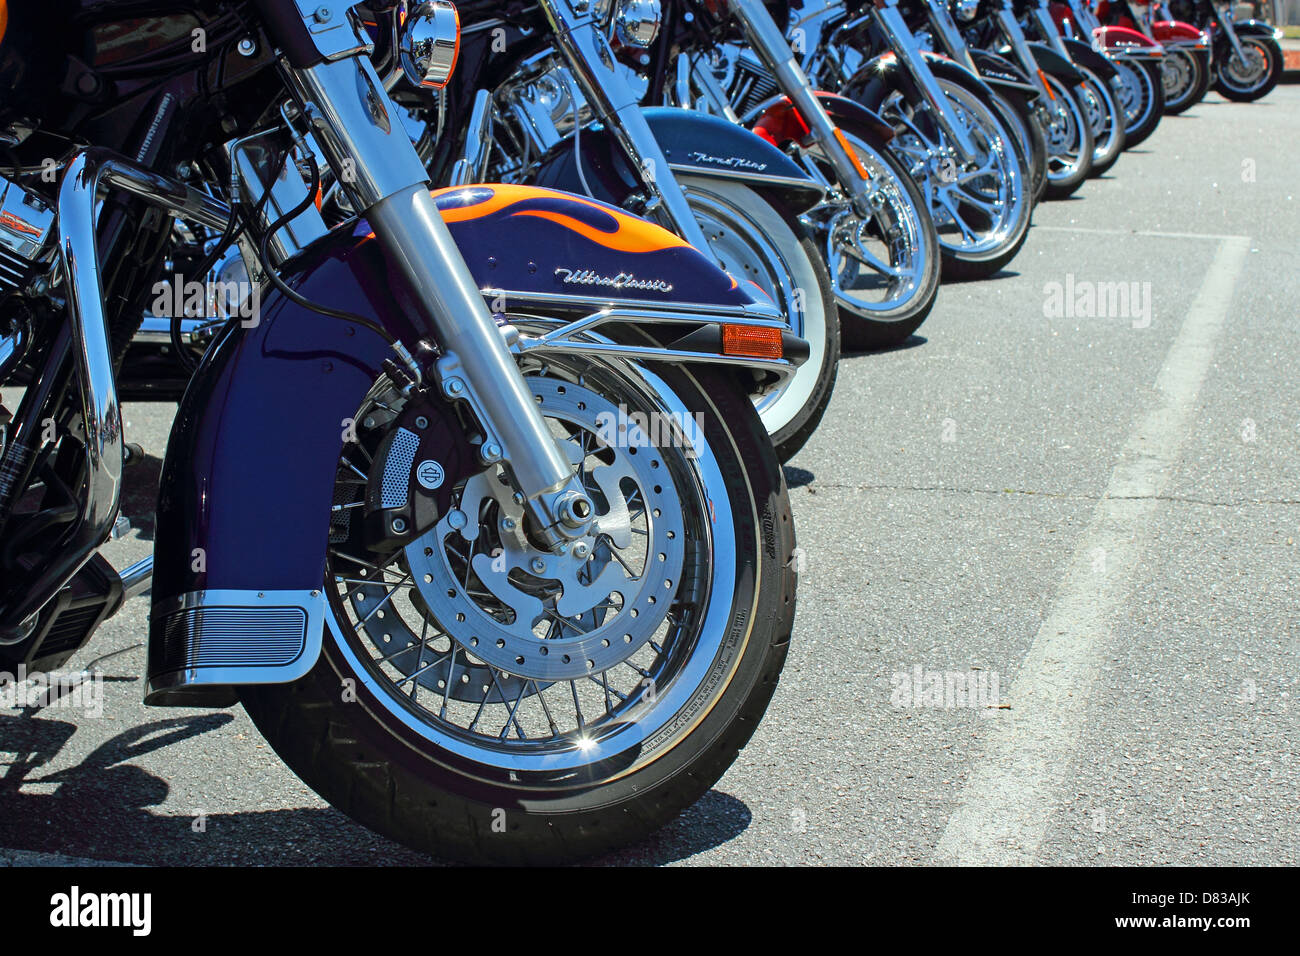 A line of Harley Davidson motorcycles at Myrtle Beach Bike Week 2013, May 14th 2013 Stock Photo